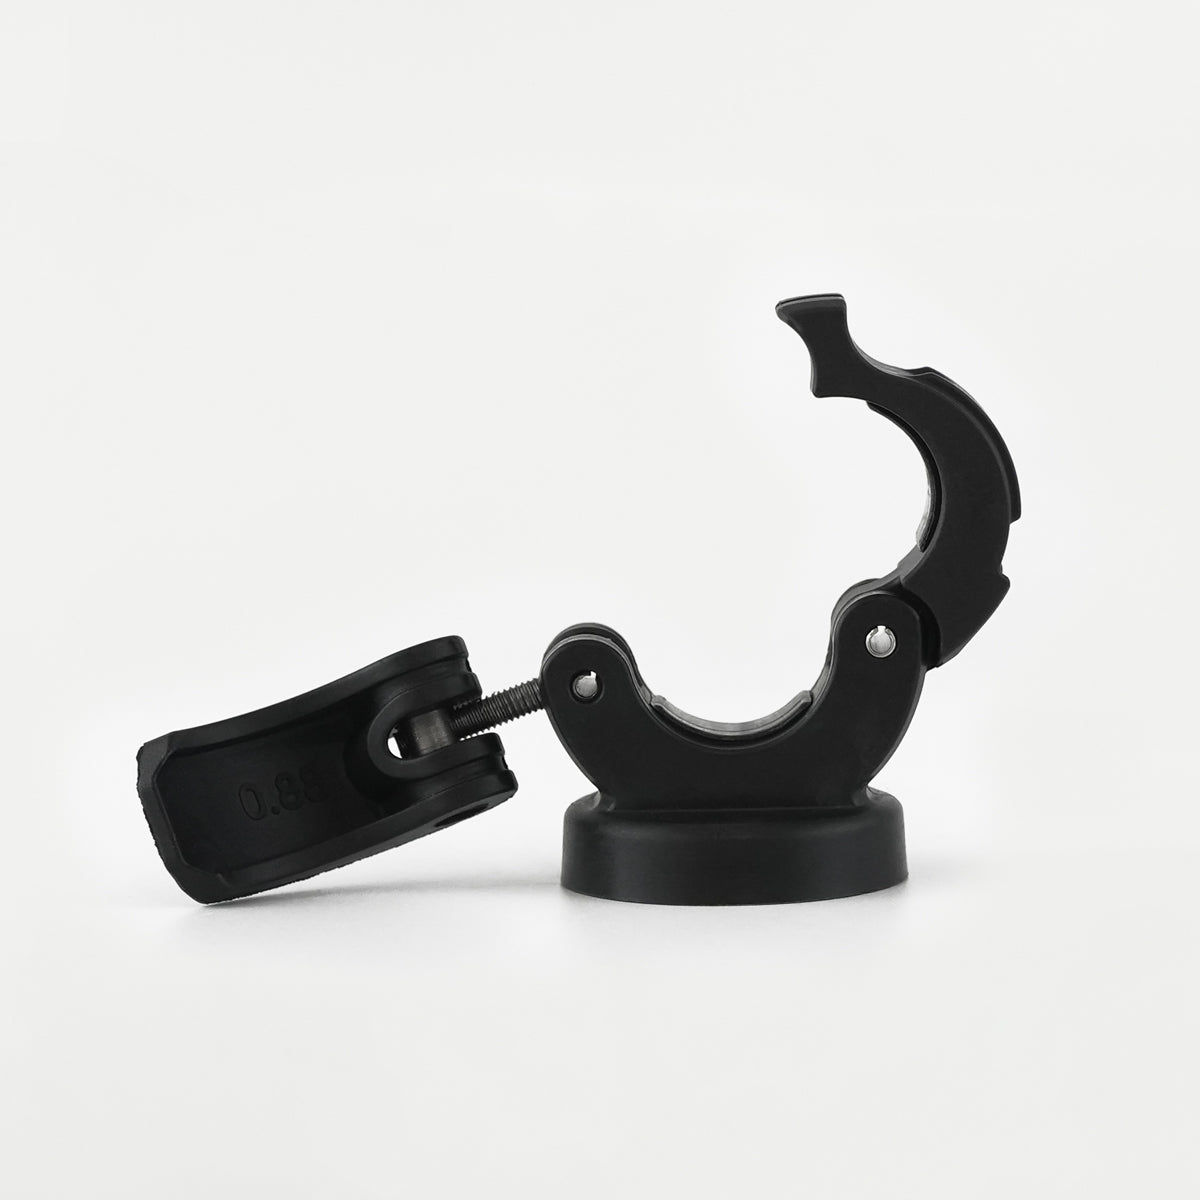 0.875" nomad+ Universal Bar Magnetic Phone Mount with quick-release snap over clamp open(0.875" with quick-release snap over clamp open)